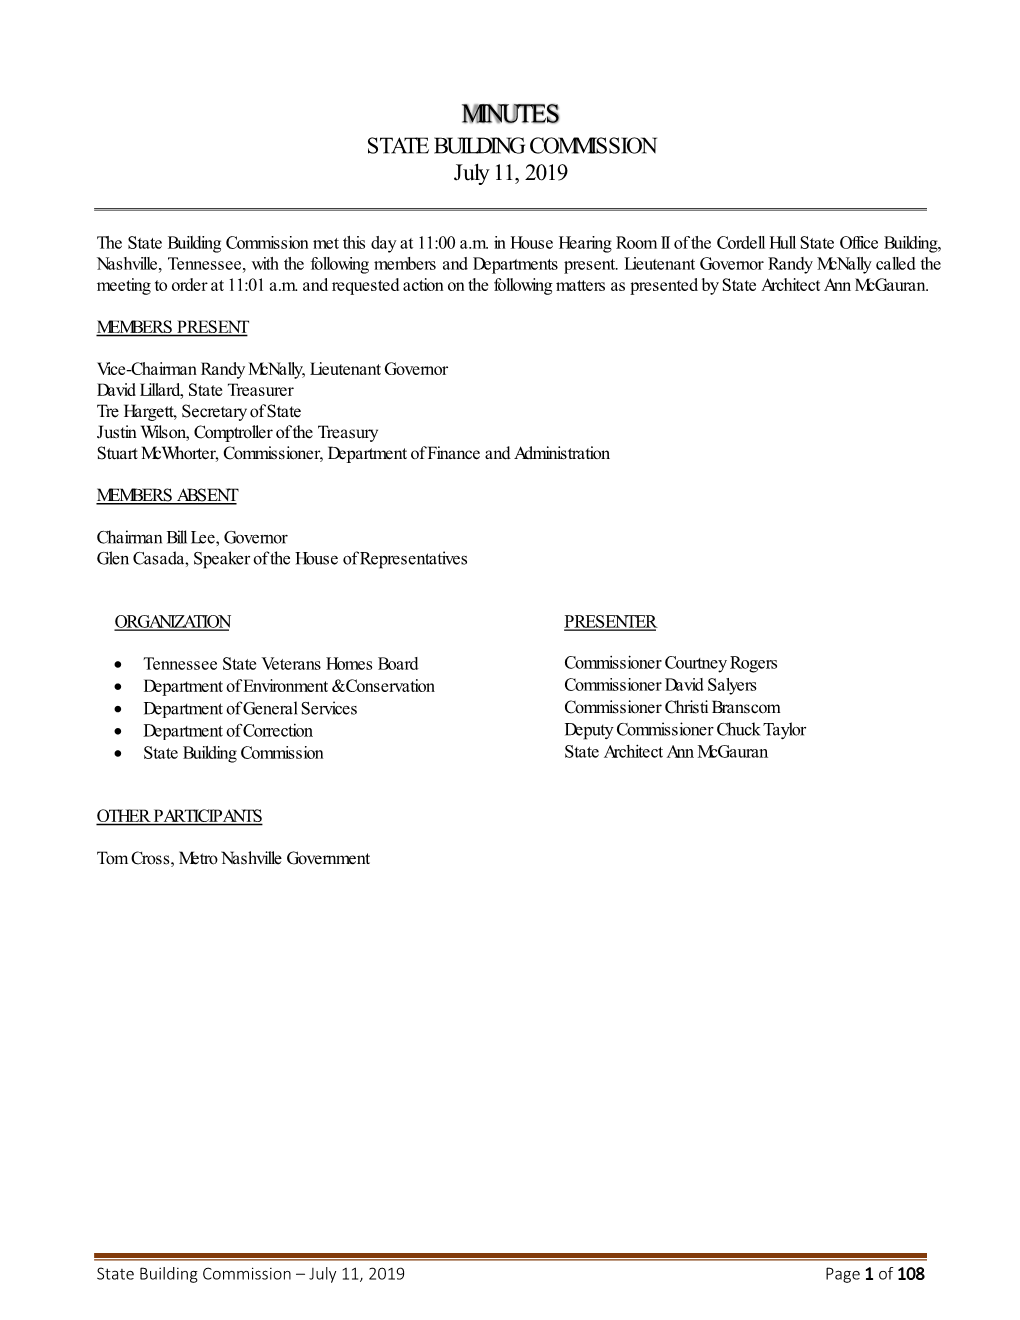 MINUTES STATE BUILDING COMMISSION July 11, 2019